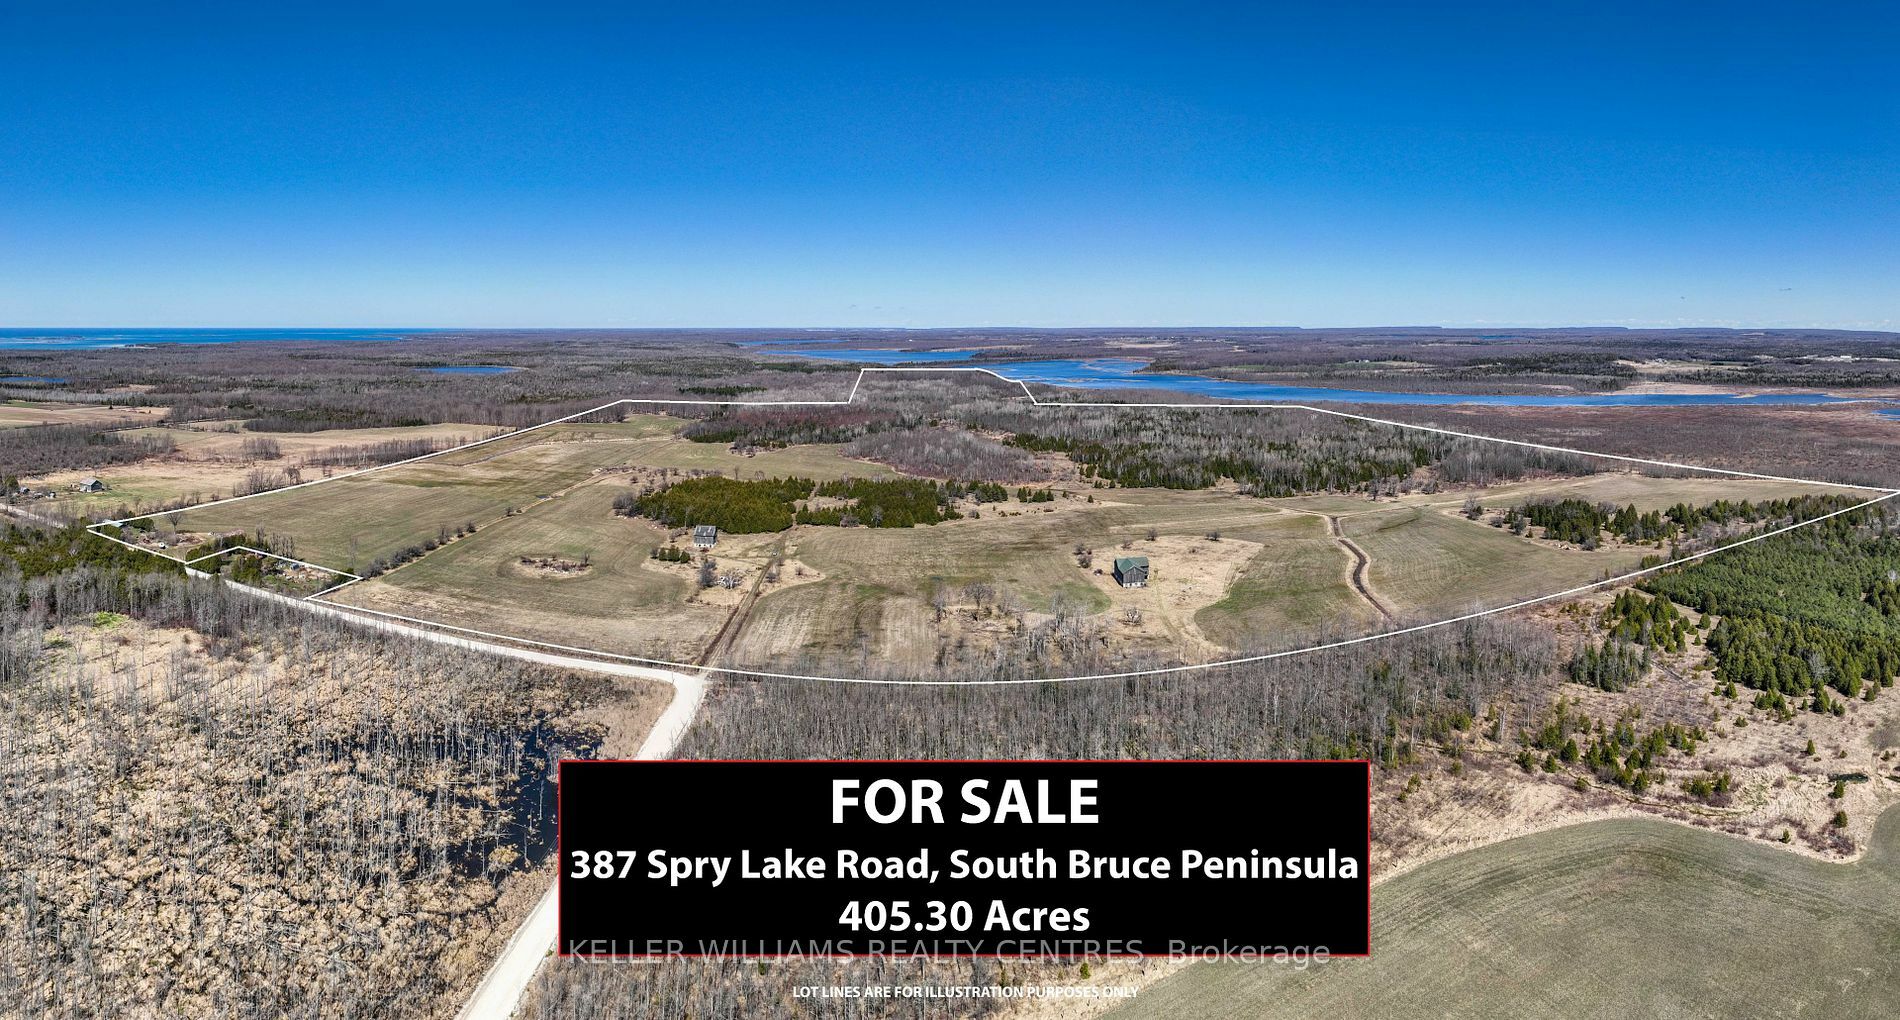 387 Spry Lake Rd  South Bruce Peninsula ON N0H 2T0 photo